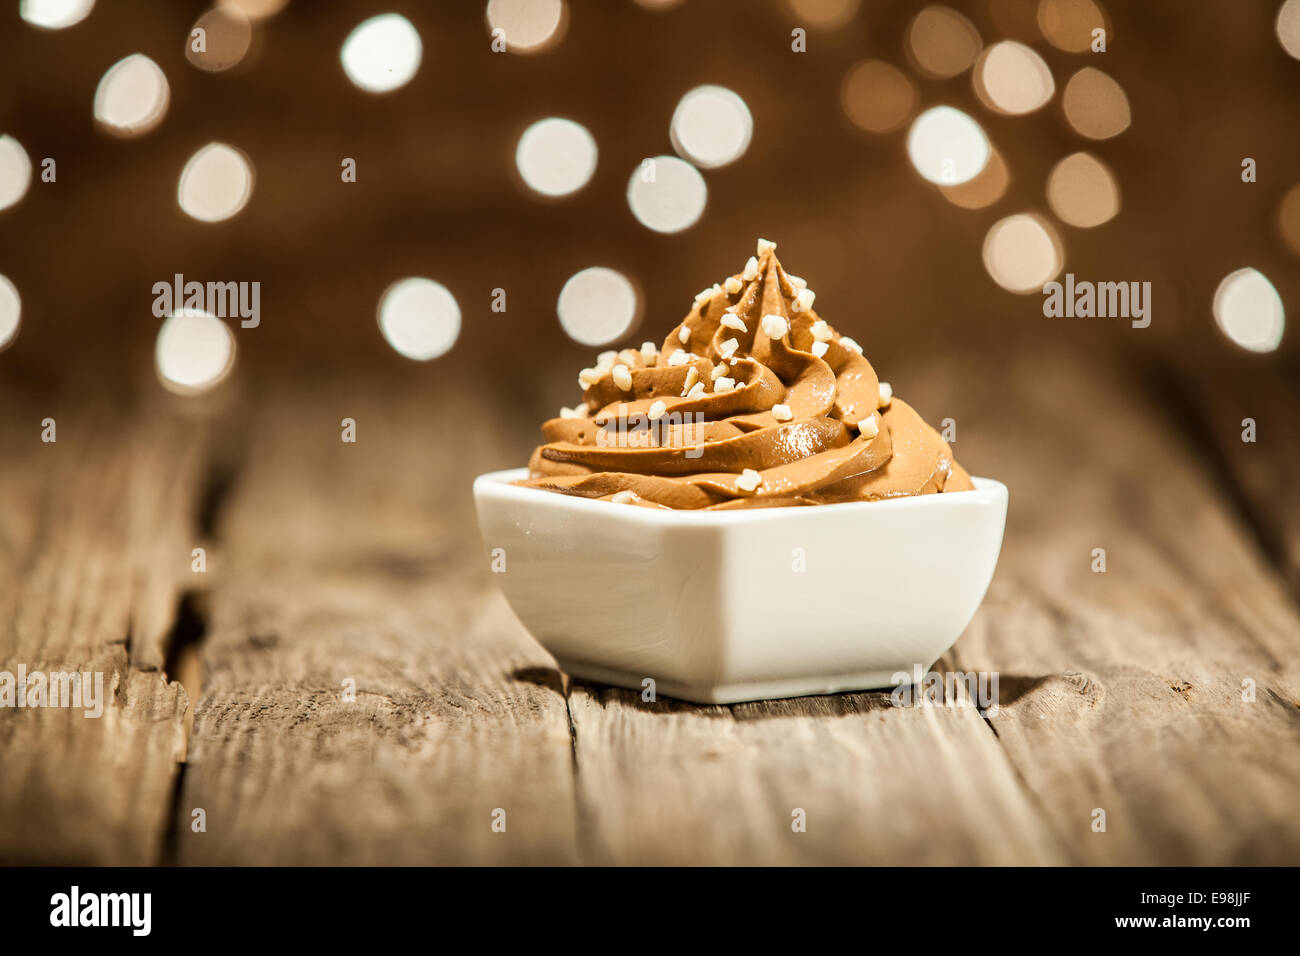 Macro Mouth Watering Brown Frozen Yogurt on Bowl Placed on Wooden Table Stock Photo